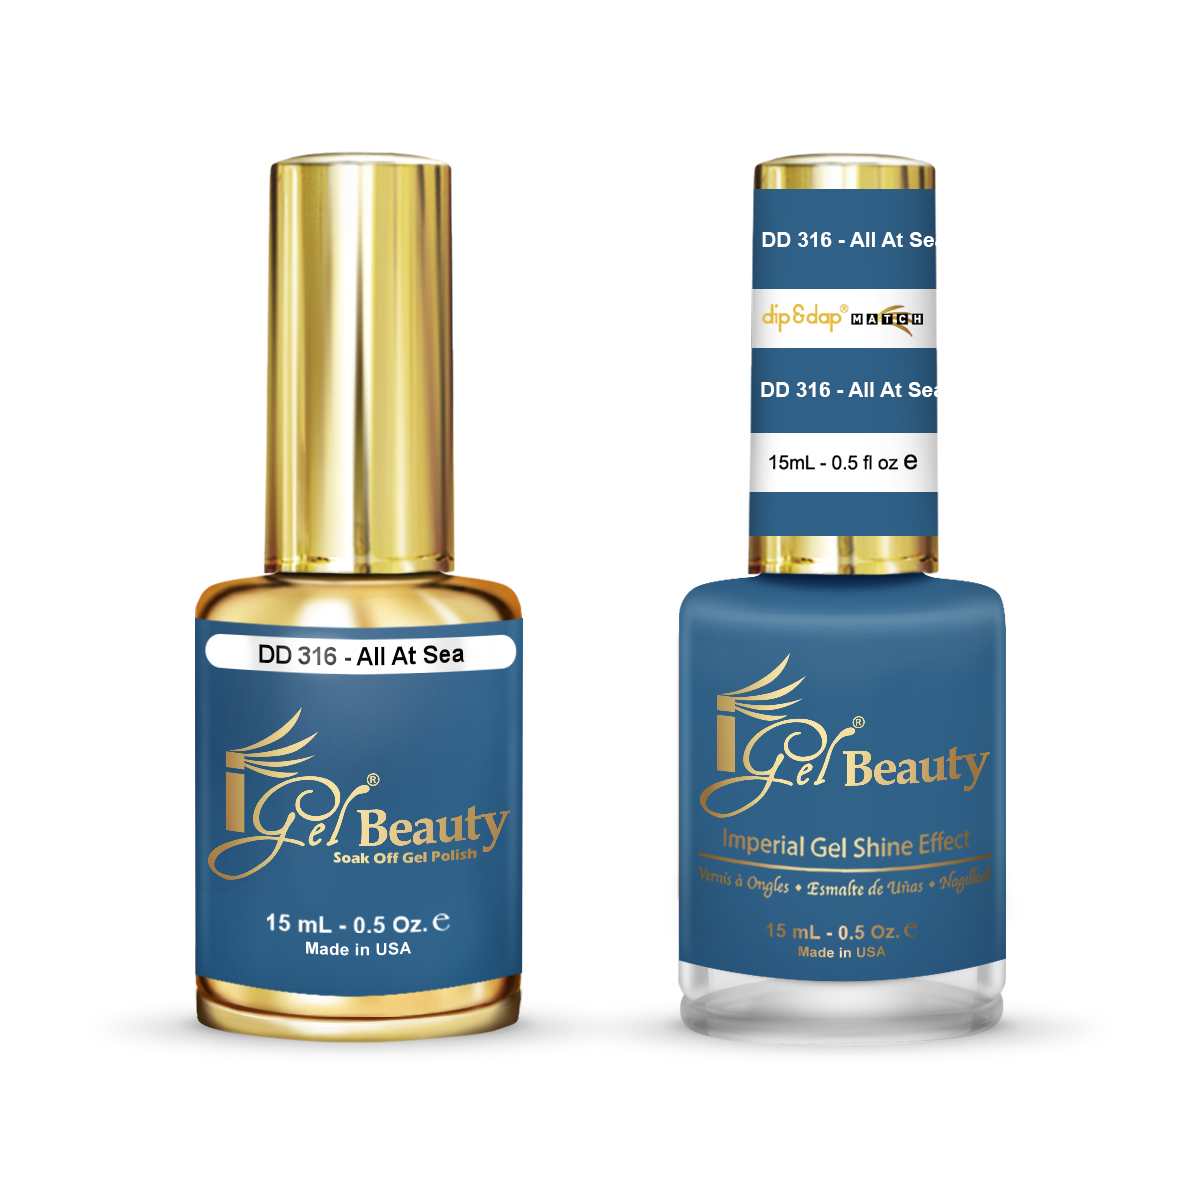 DD316 All At Sea Gel and Polish Duo By IGel Beauty